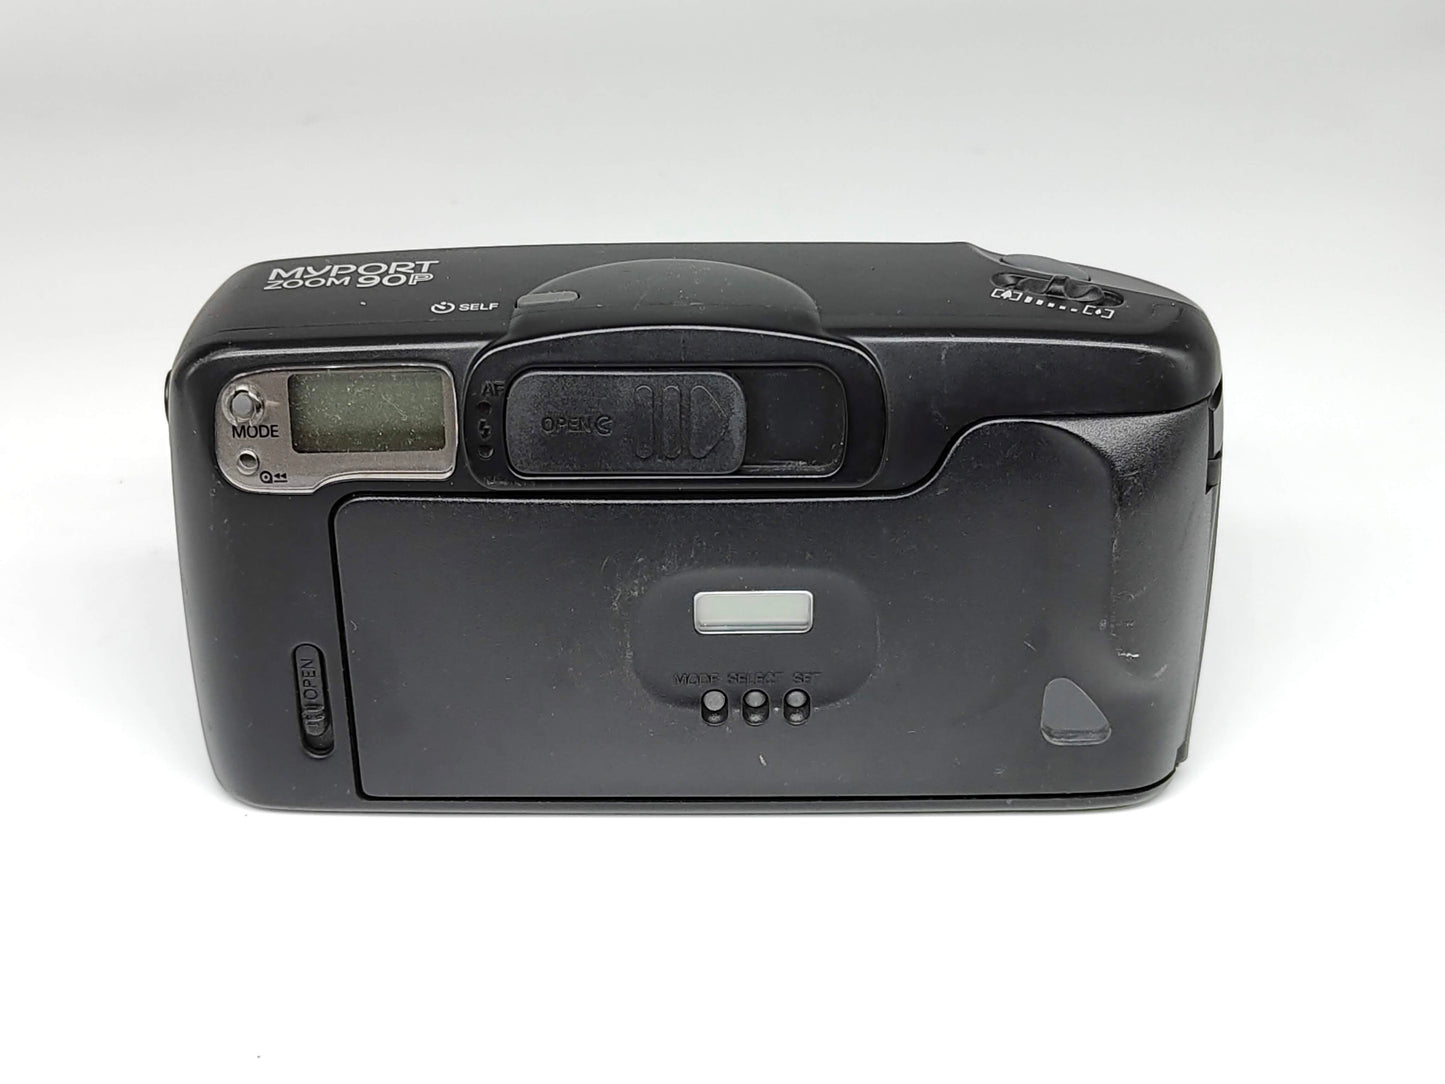 Ricoh Myport 90P point-and-shoot film camera